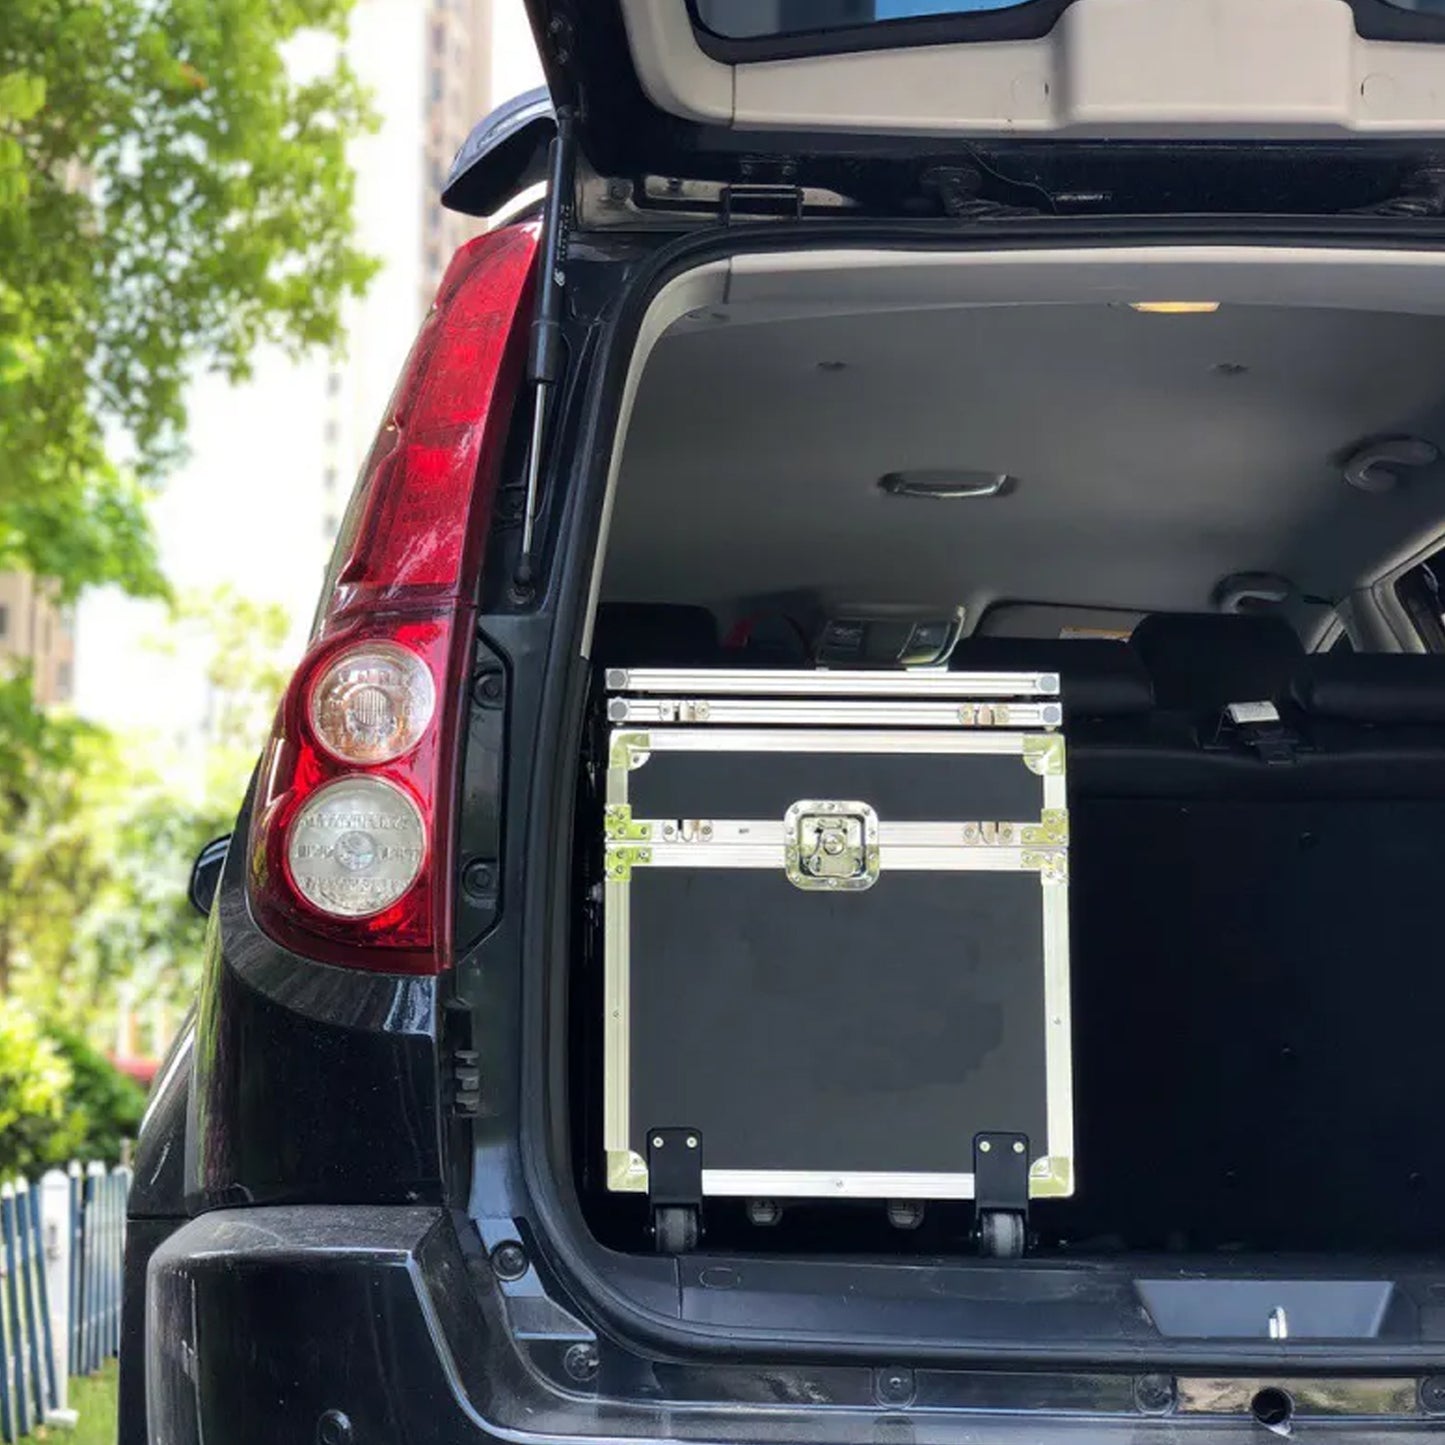 Portable Kitchen in a box, easily fits in the back of a car.